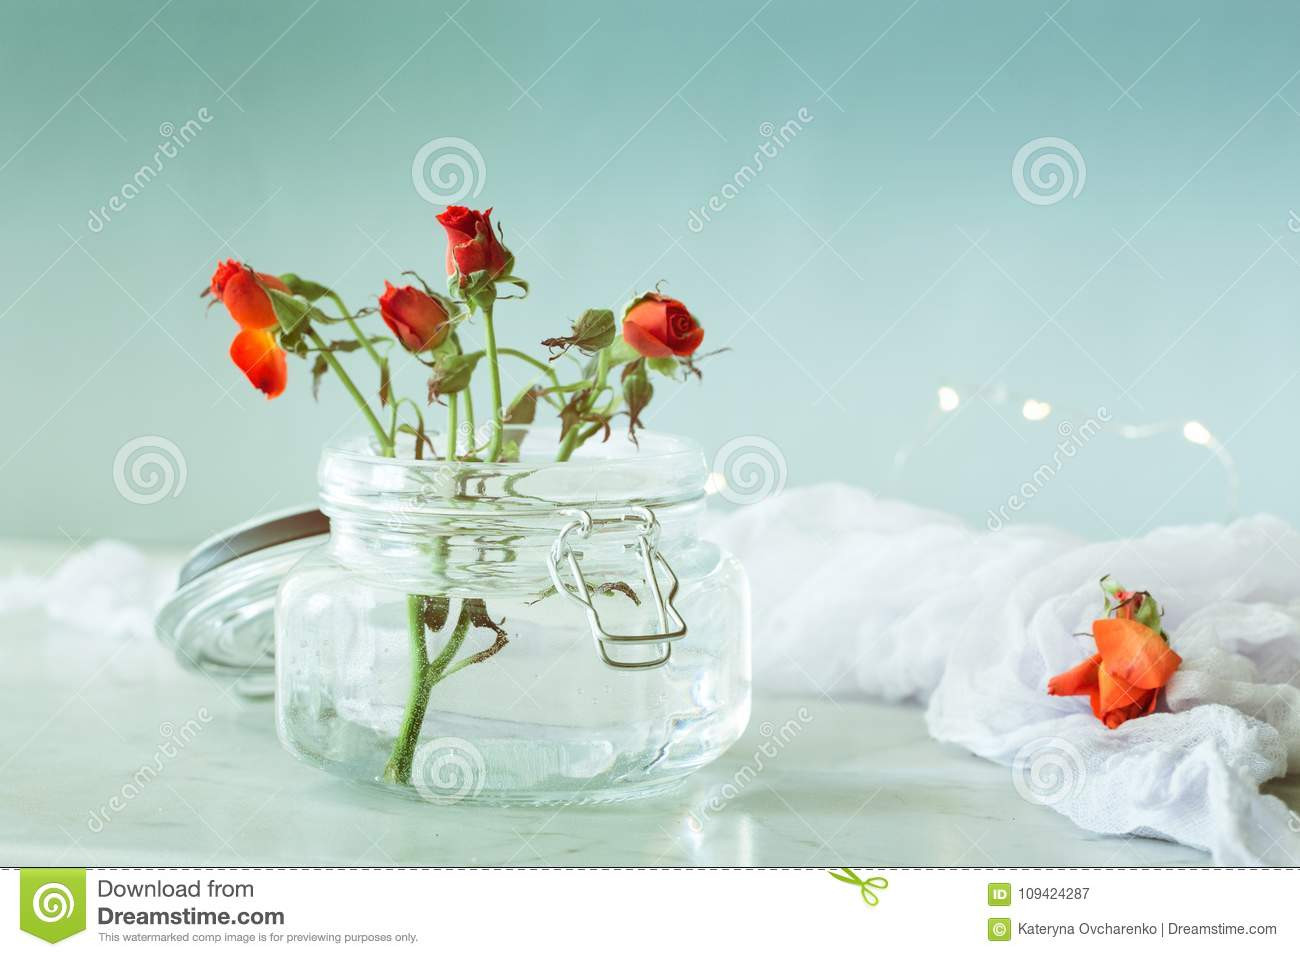 21 Recommended Artificial Flowers In Vase with Lights 2024 free download artificial flowers in vase with lights of artistic photo of beautiful rose in a vase on a marble table na throughout download artistic photo of beautiful rose in a vase on a marble table na 